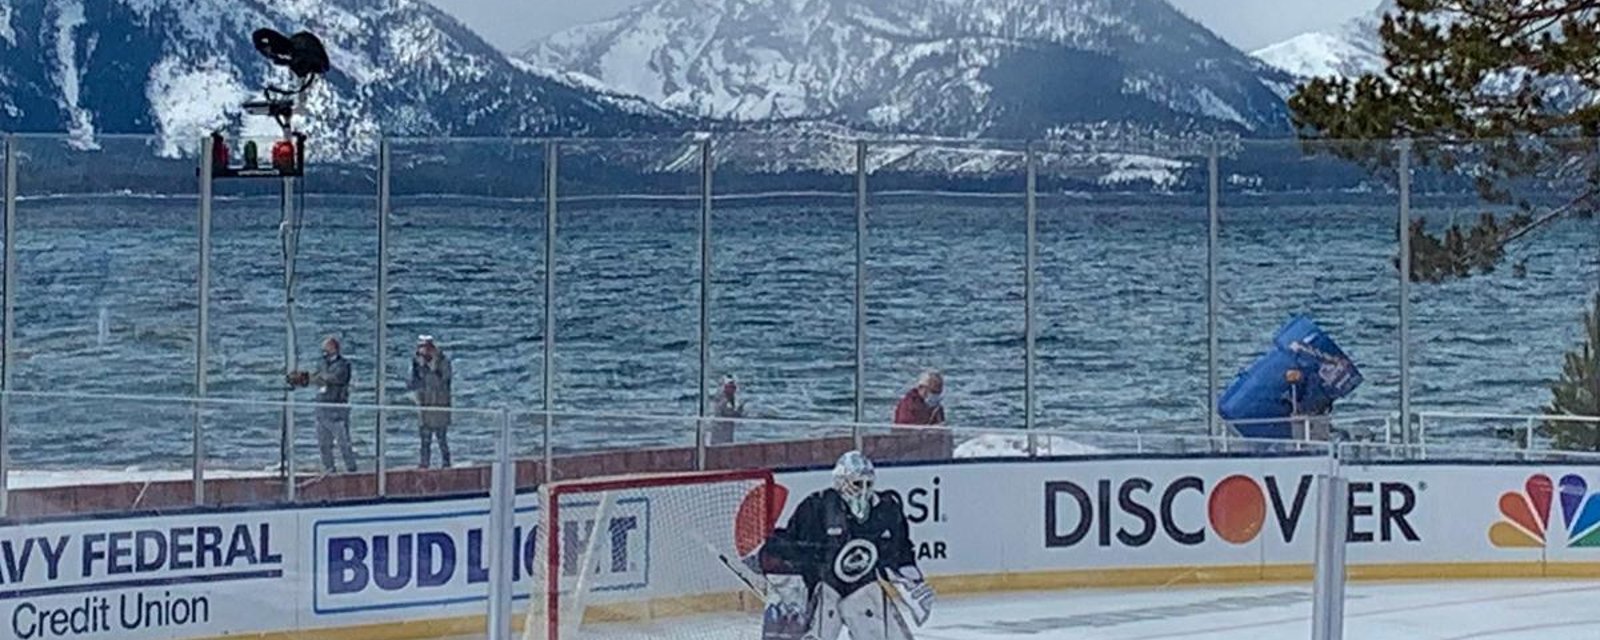 One team to blame for today's disaster in Lake Tahoe?